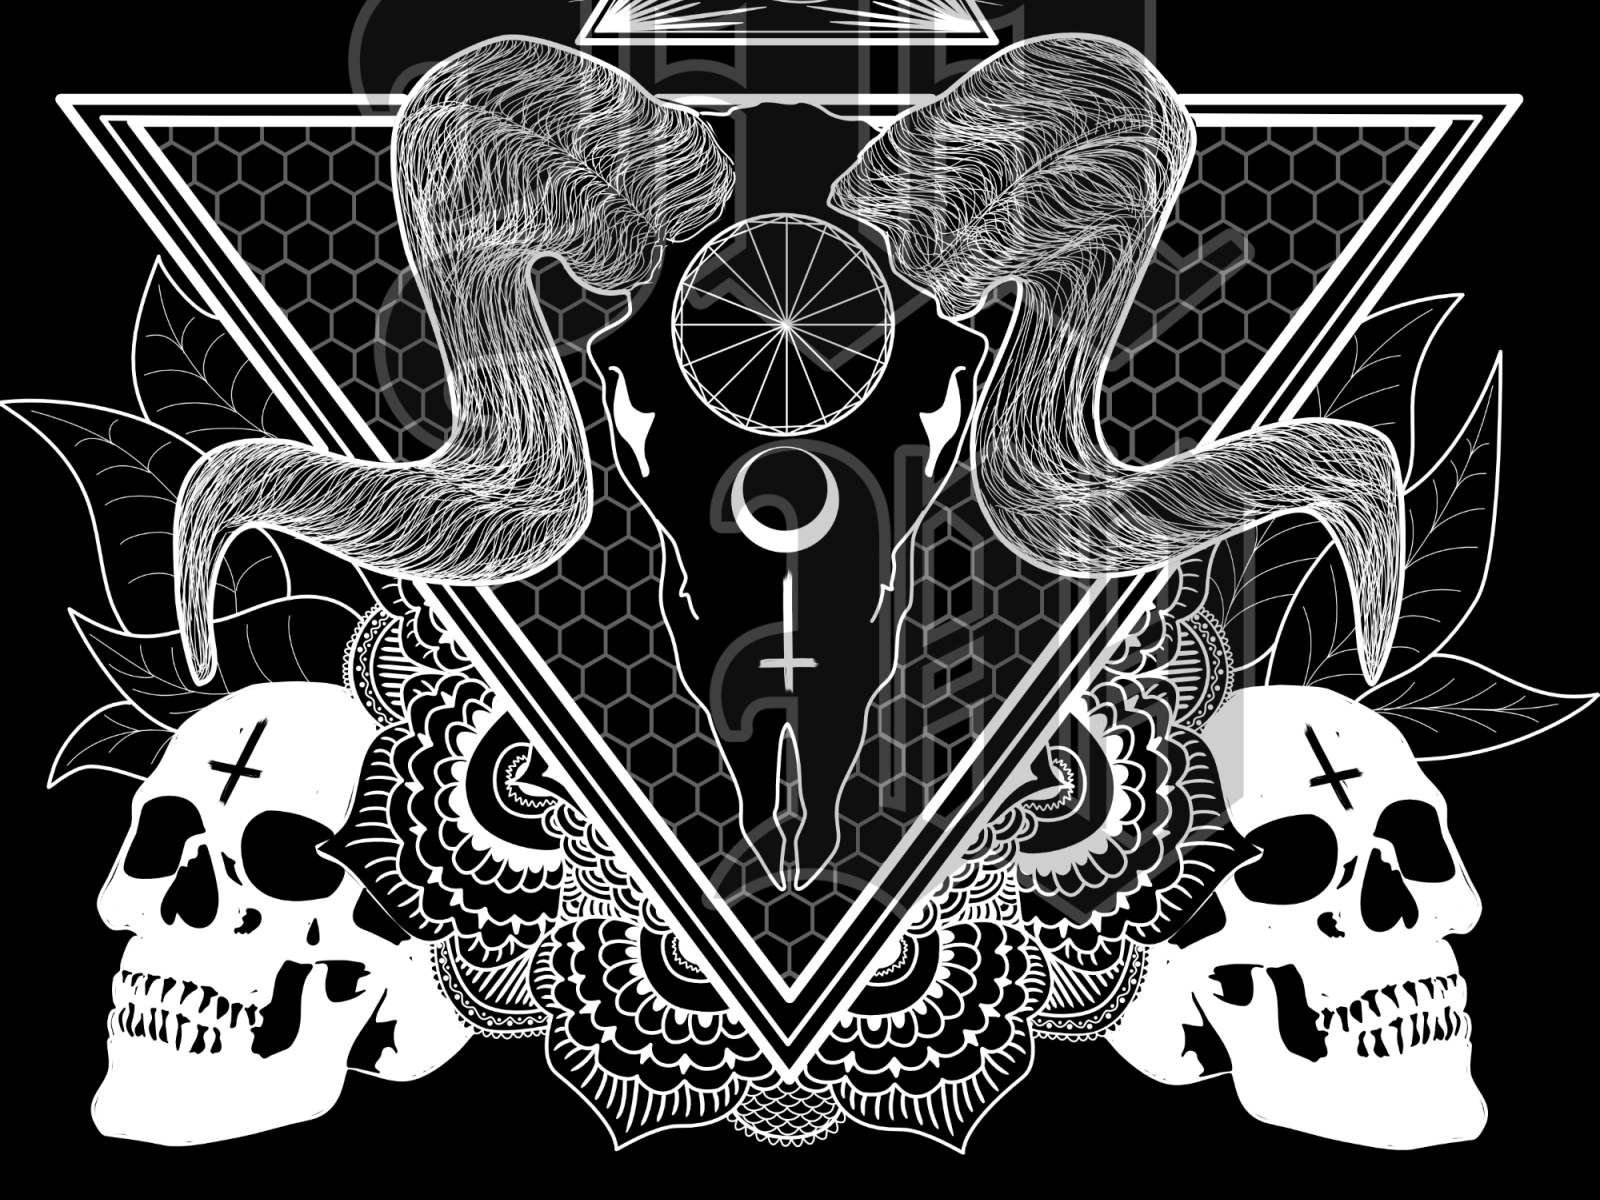 Dark/Gothic/Metal or Tattoo inspired graphic design by Mandell Forrest on Dribbble